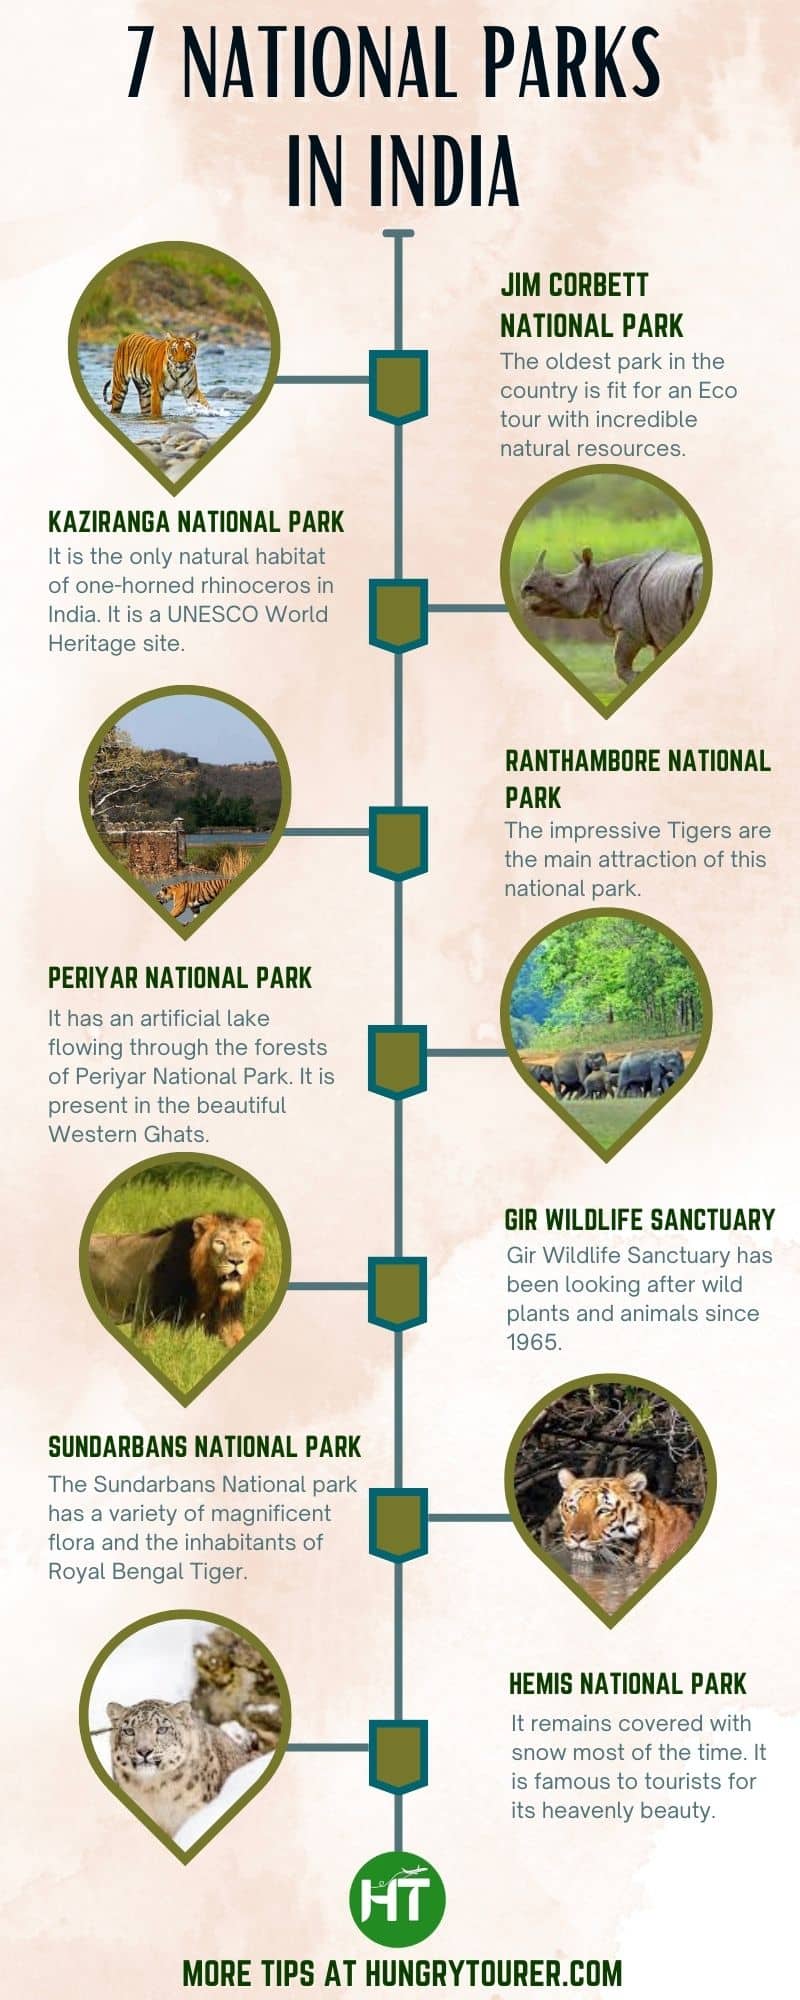 Most Popular National Parks in India